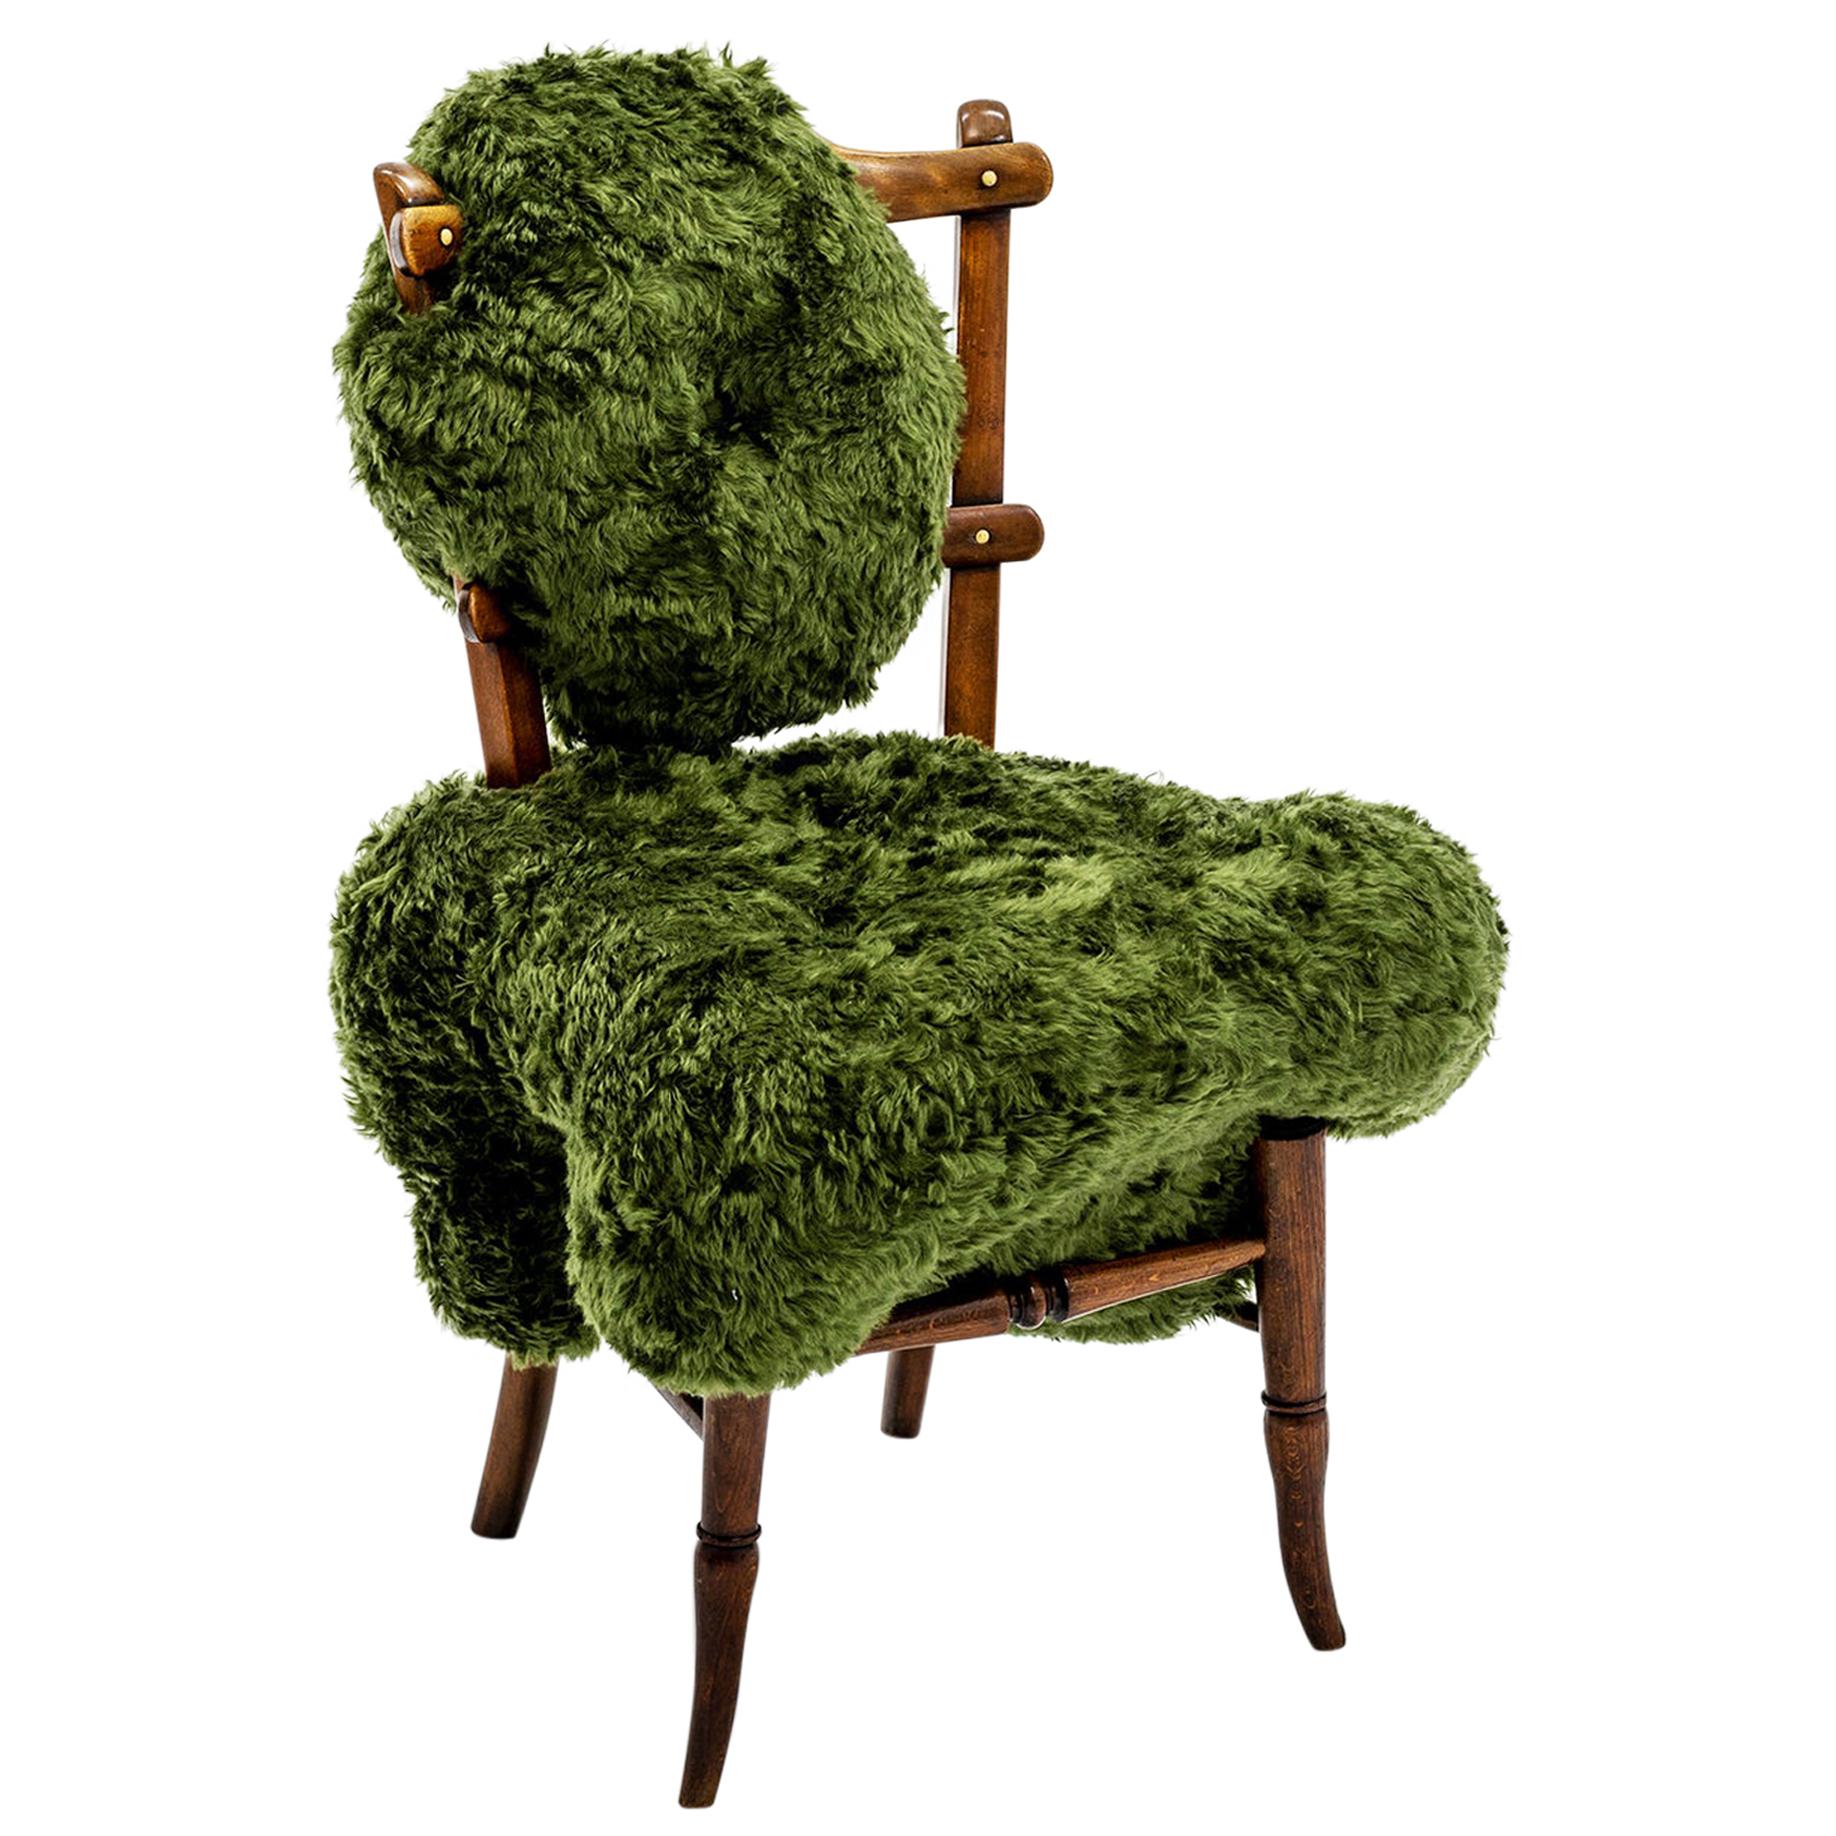 'Fuzzy Hi!breed Chair' with biomorphic upholstery sculpted on victorian chair